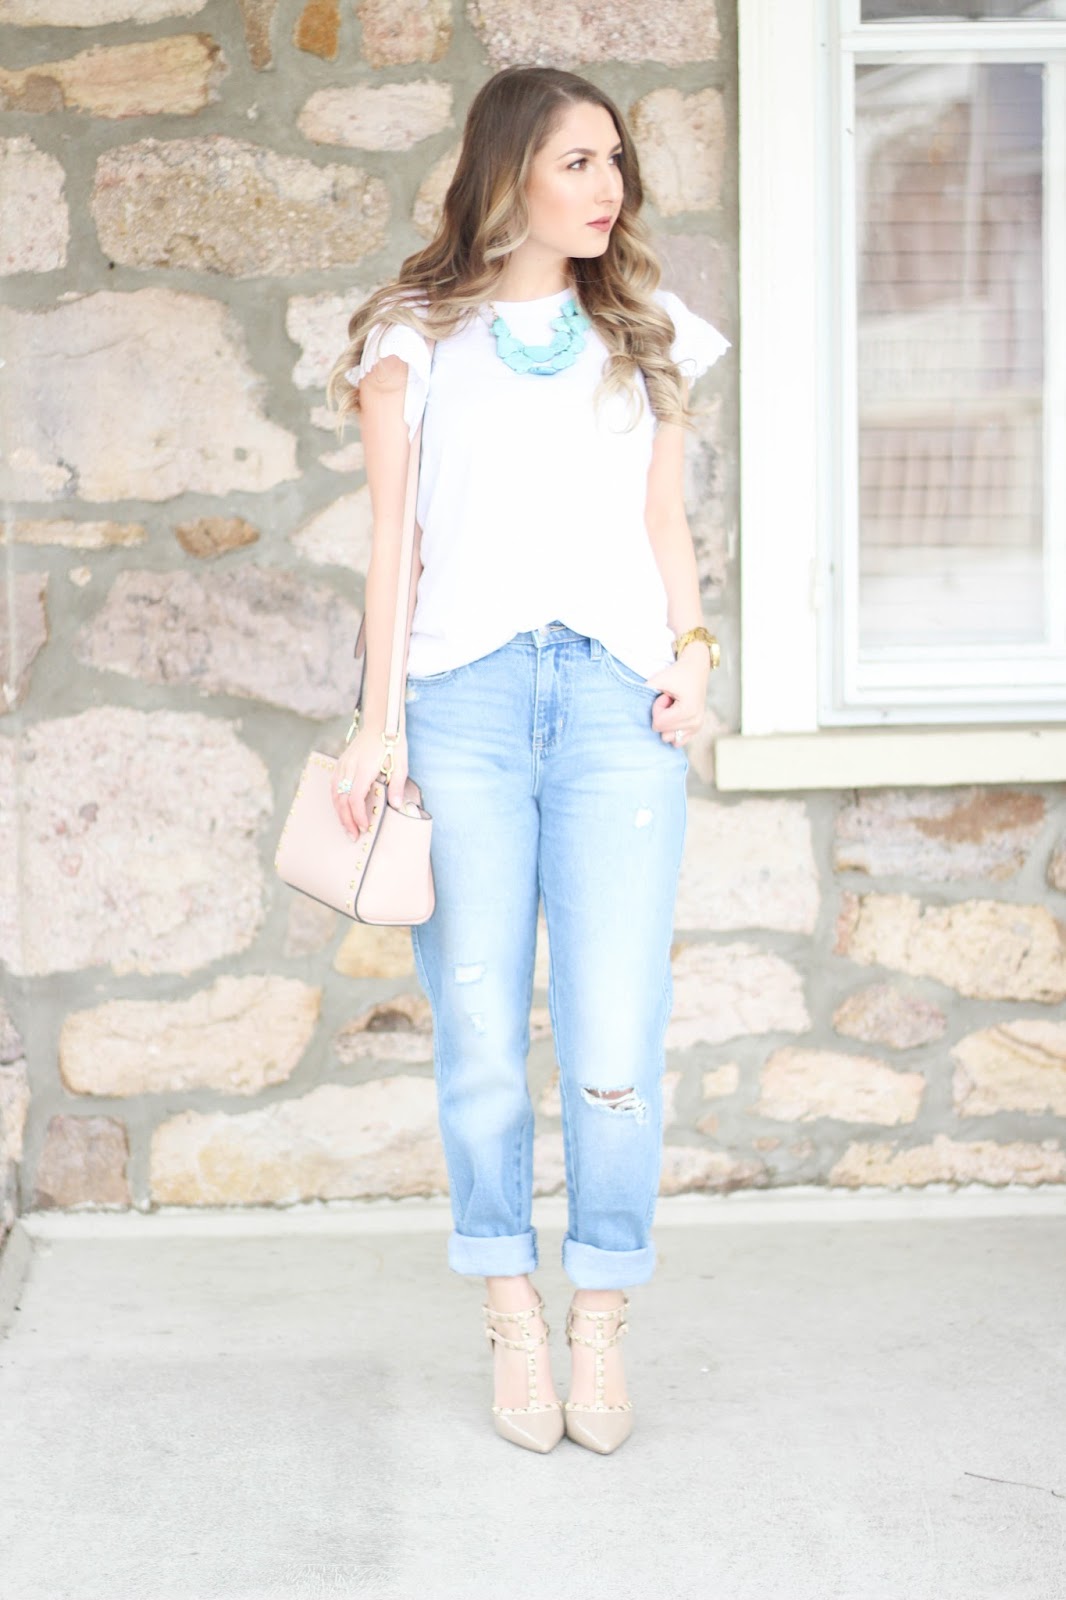 BOYFRIEND JEANS & WHITE TEE || STYLISH SPRING OUTFIT | A Classy Fashionista